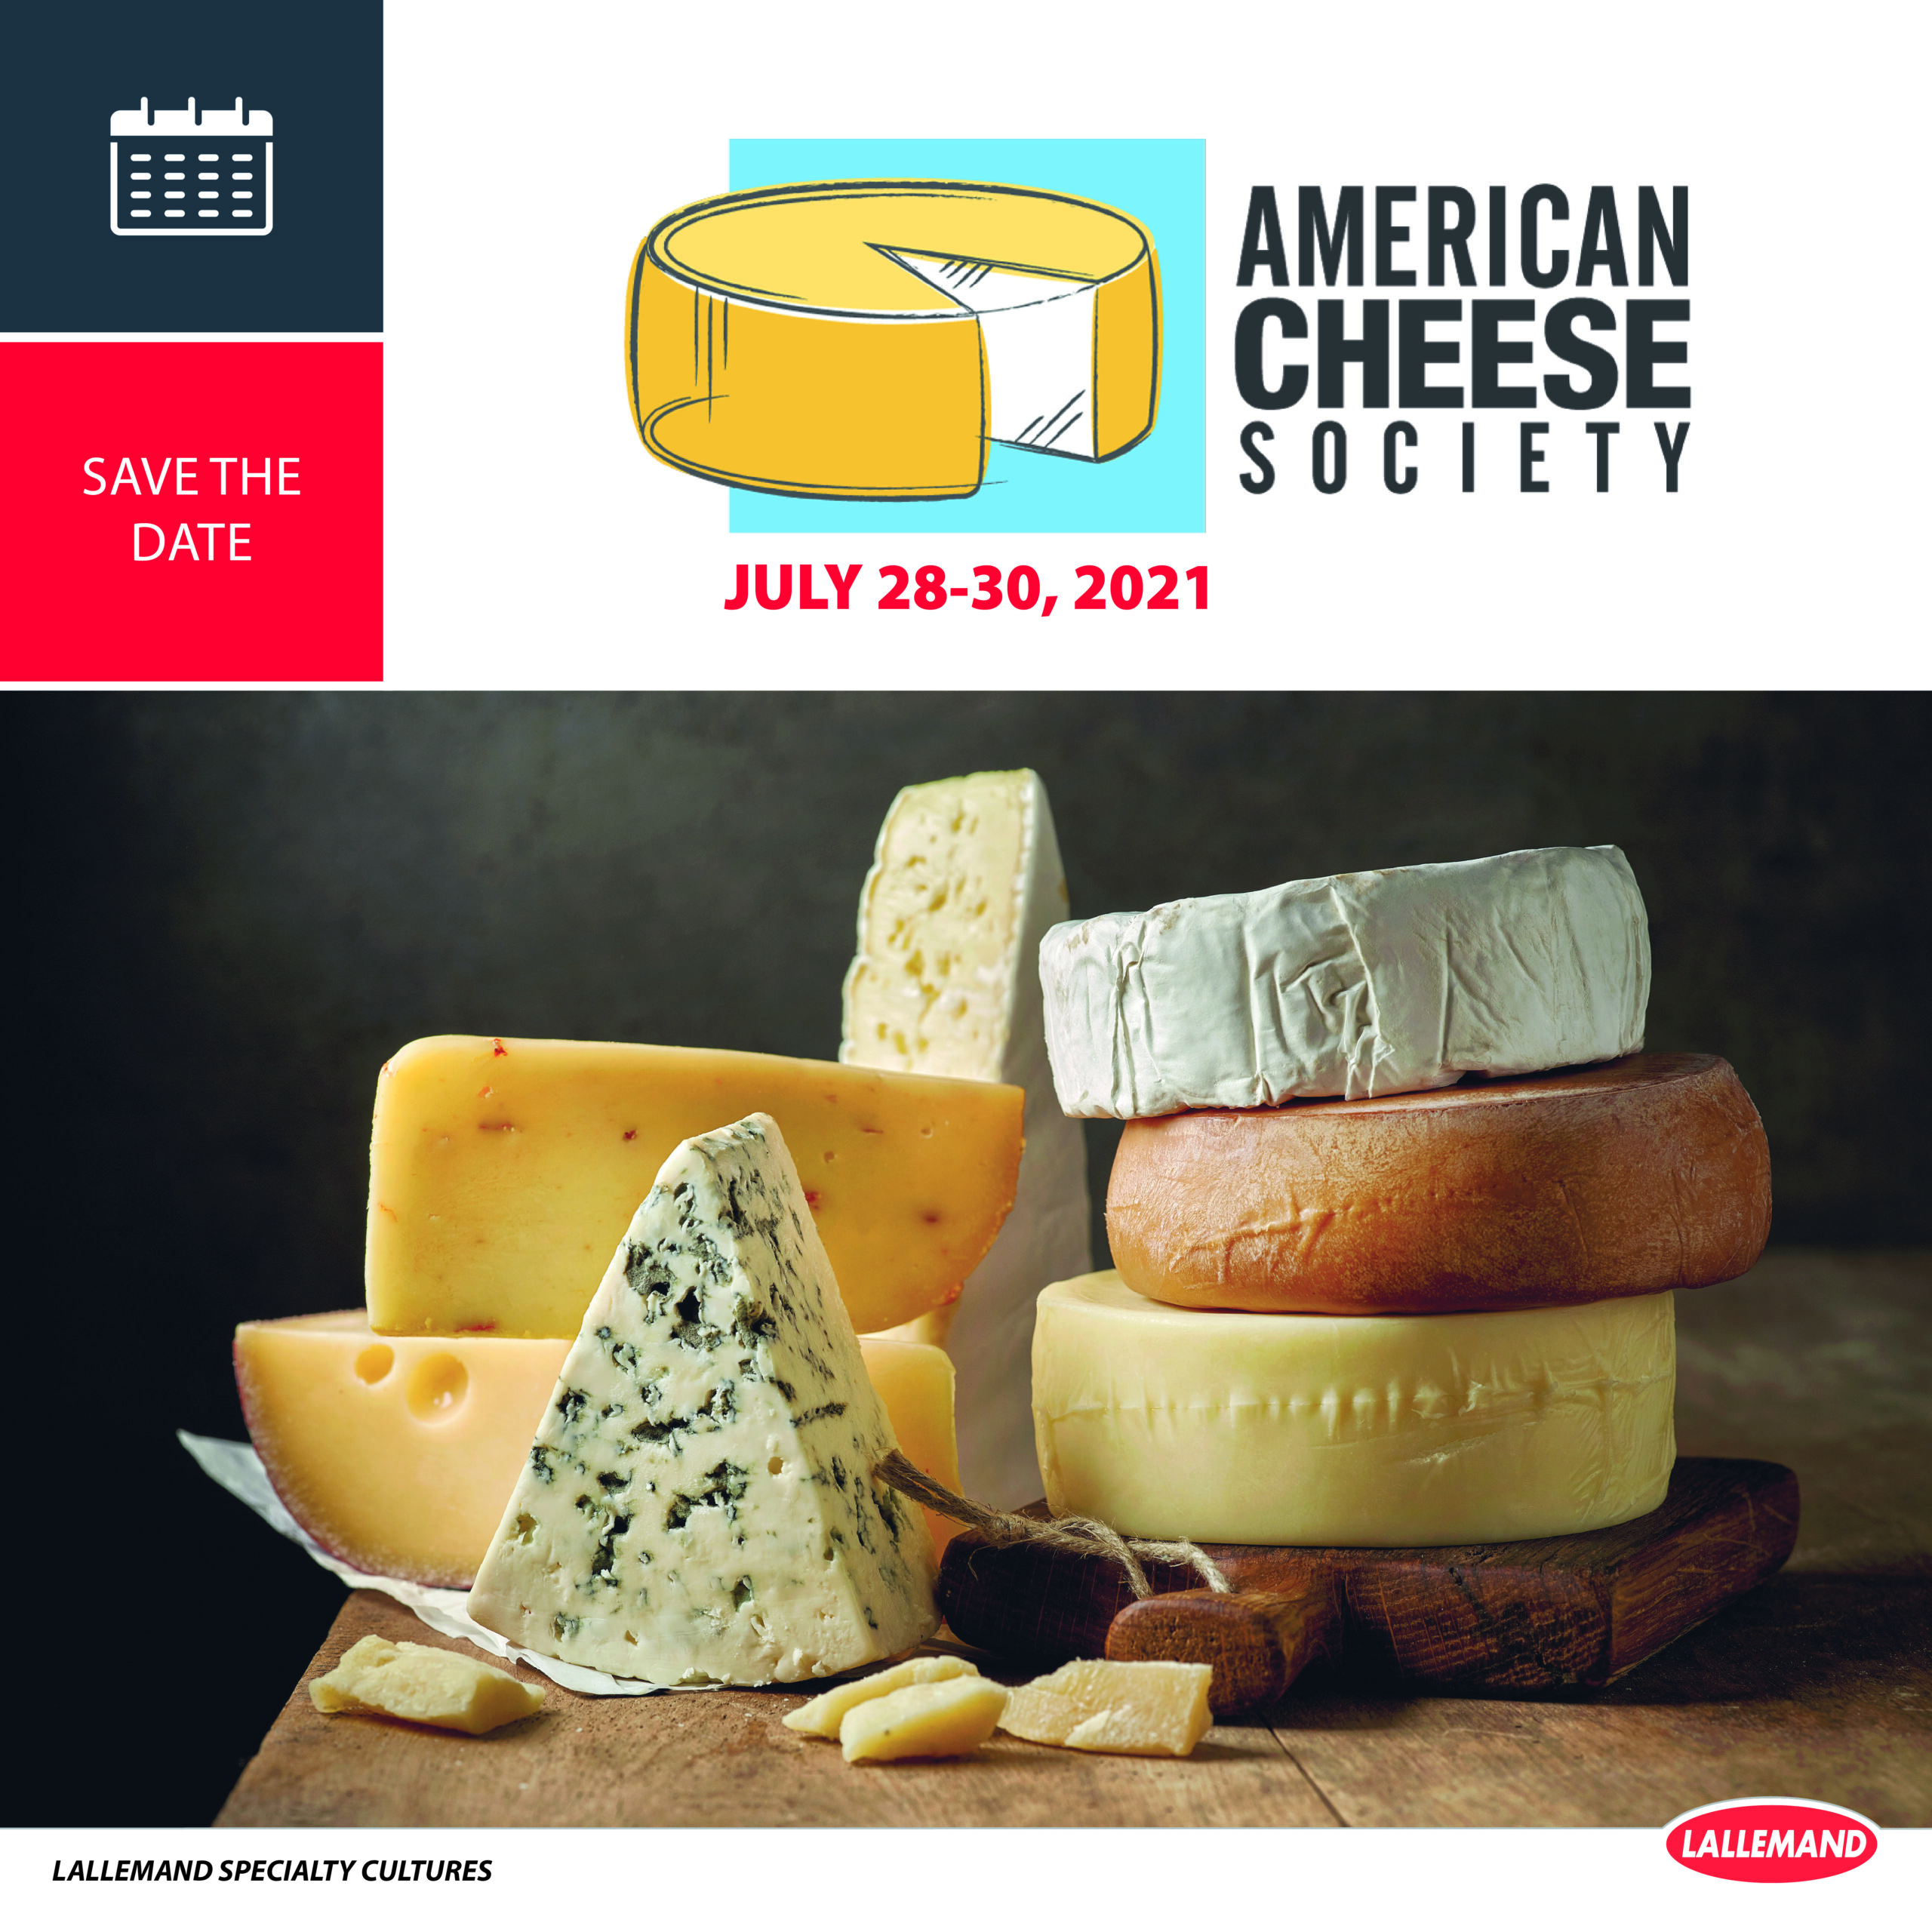 American Cheese Society (ACS) Virtual Conference July 28-30, 2021